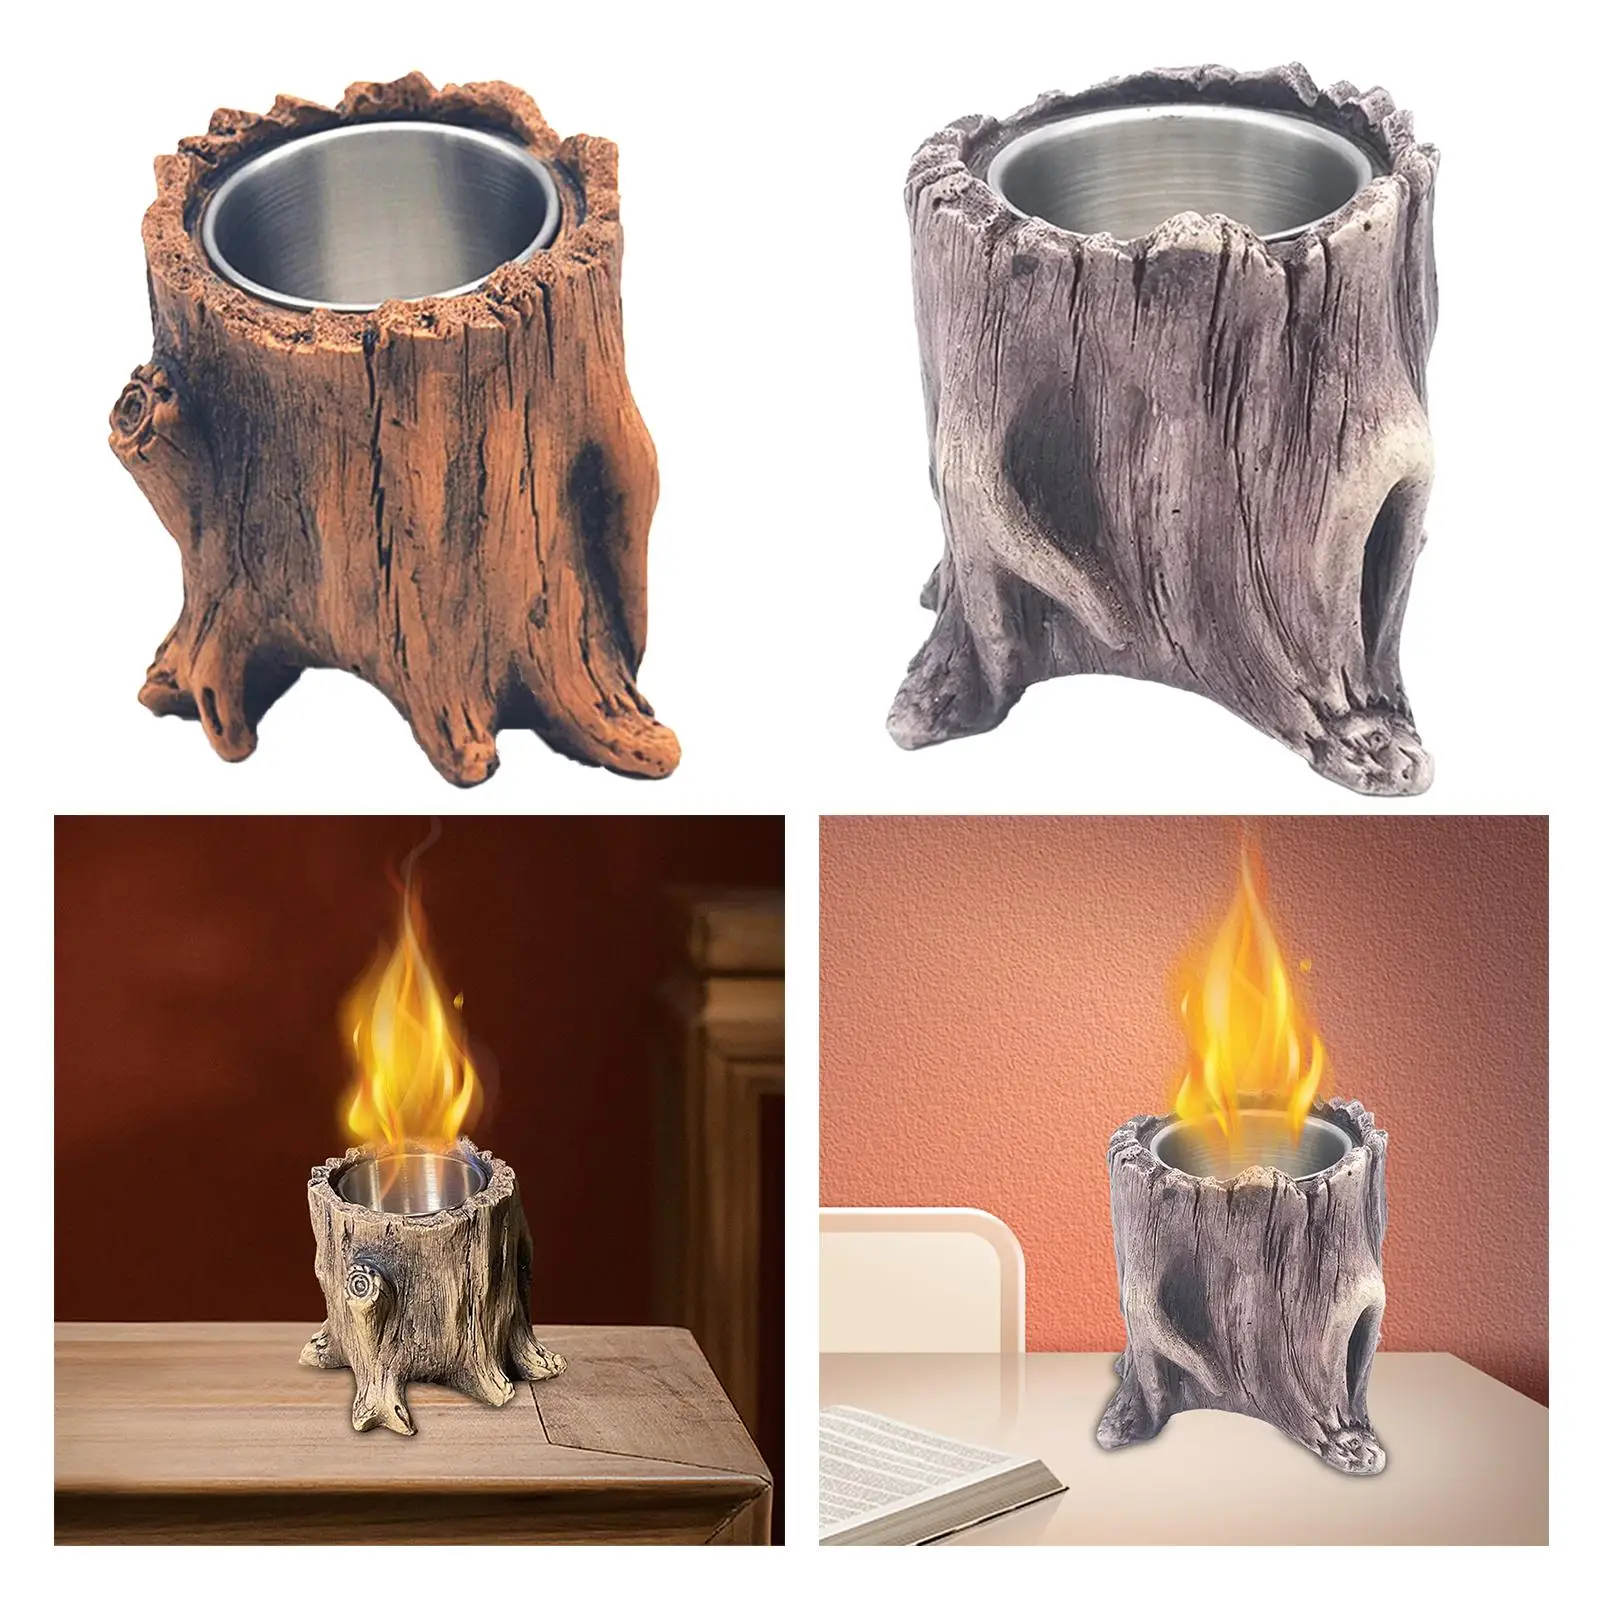 Indoor Fire Pit Tree Stump Conch Shape Smokeless Winter Burner Alcohol Fireplace for Gardens Bathroom Kitchen Camping Ornament